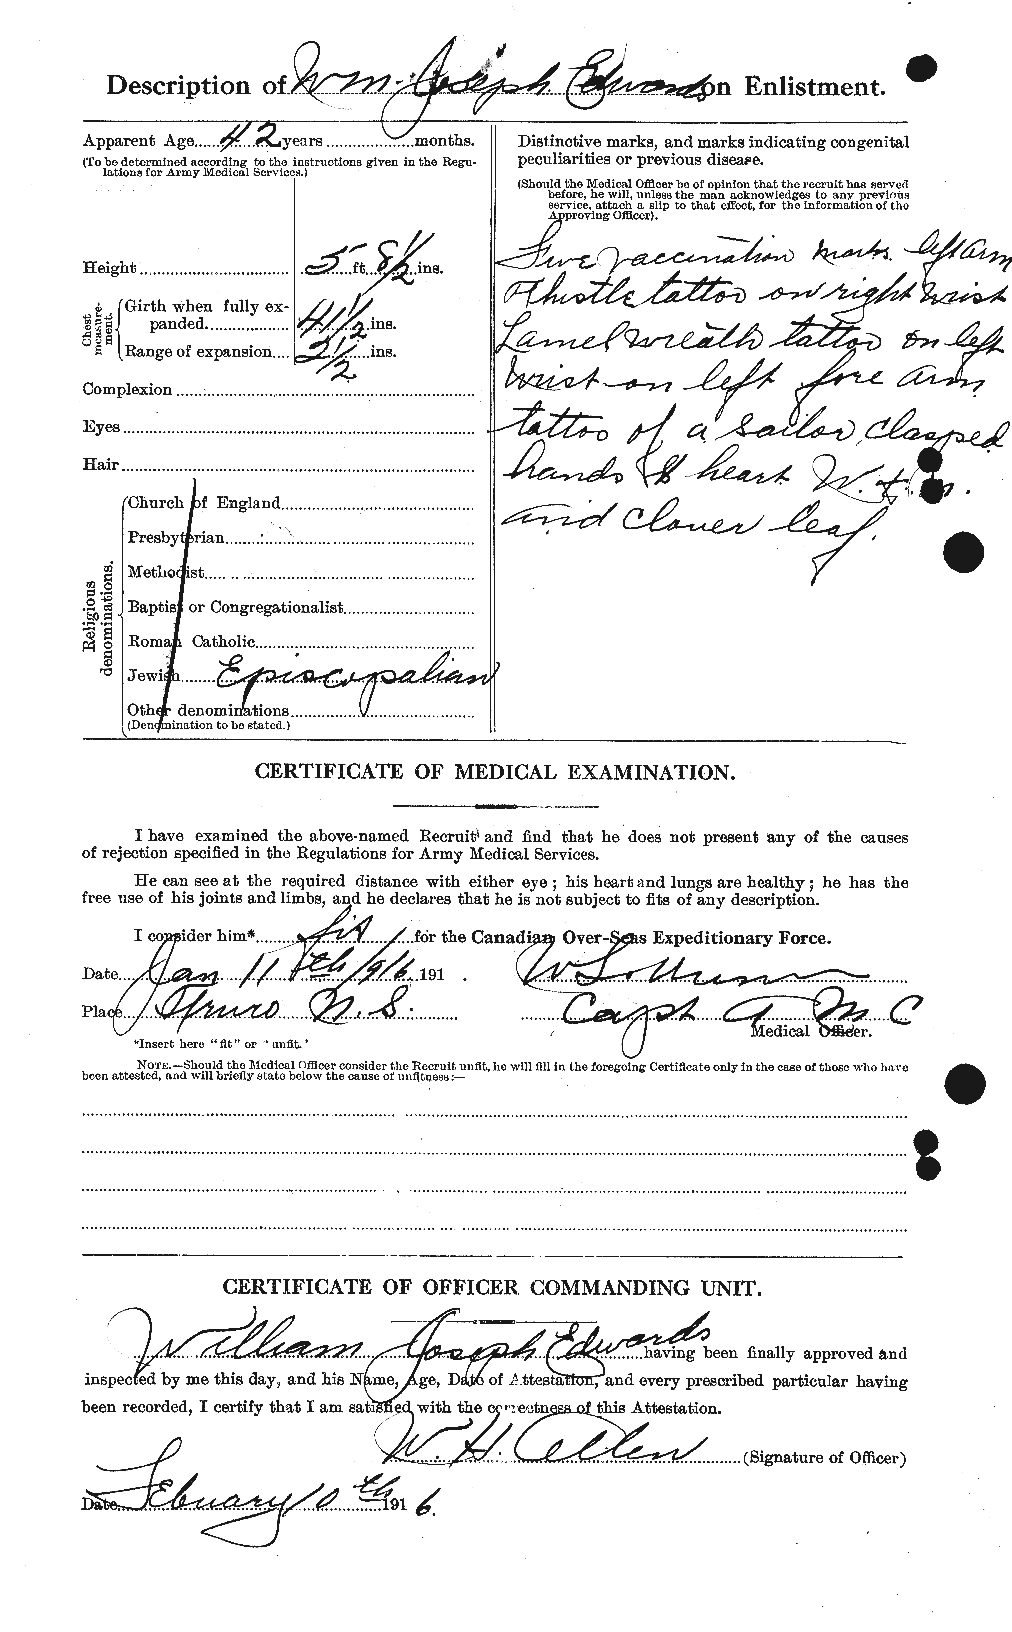 Personnel Records of the First World War - CEF 311930b